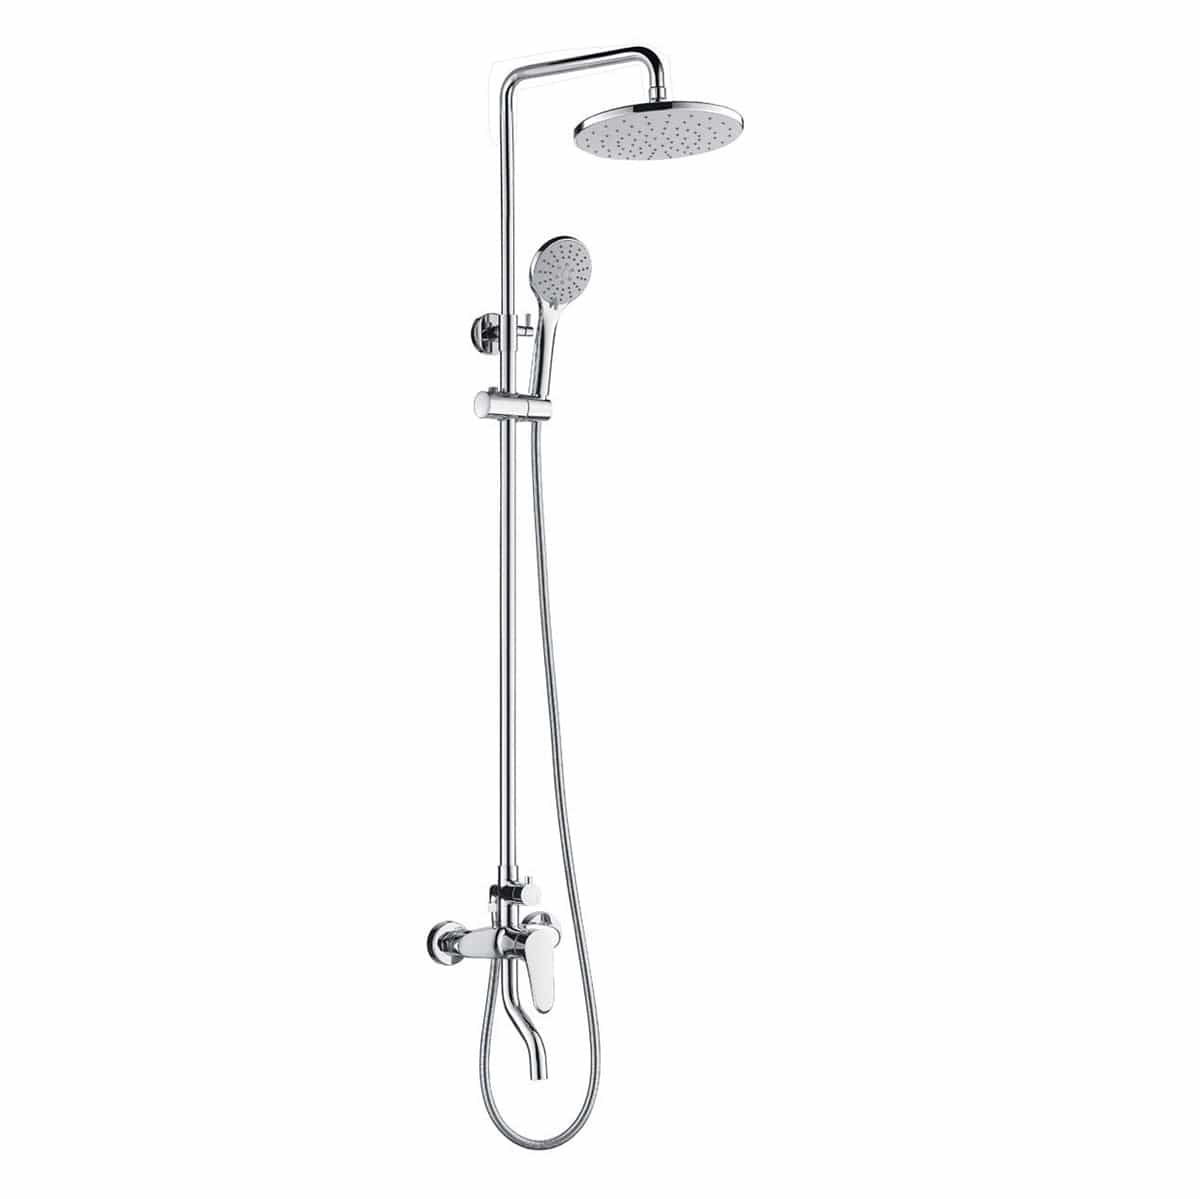 Buy MaxTen 3-in-1 Chrome Hot & Cold Mixer Shower Set - B-9101 | Shop at Supply Master Accra, Ghana Shower Set Buy Tools hardware Building materials